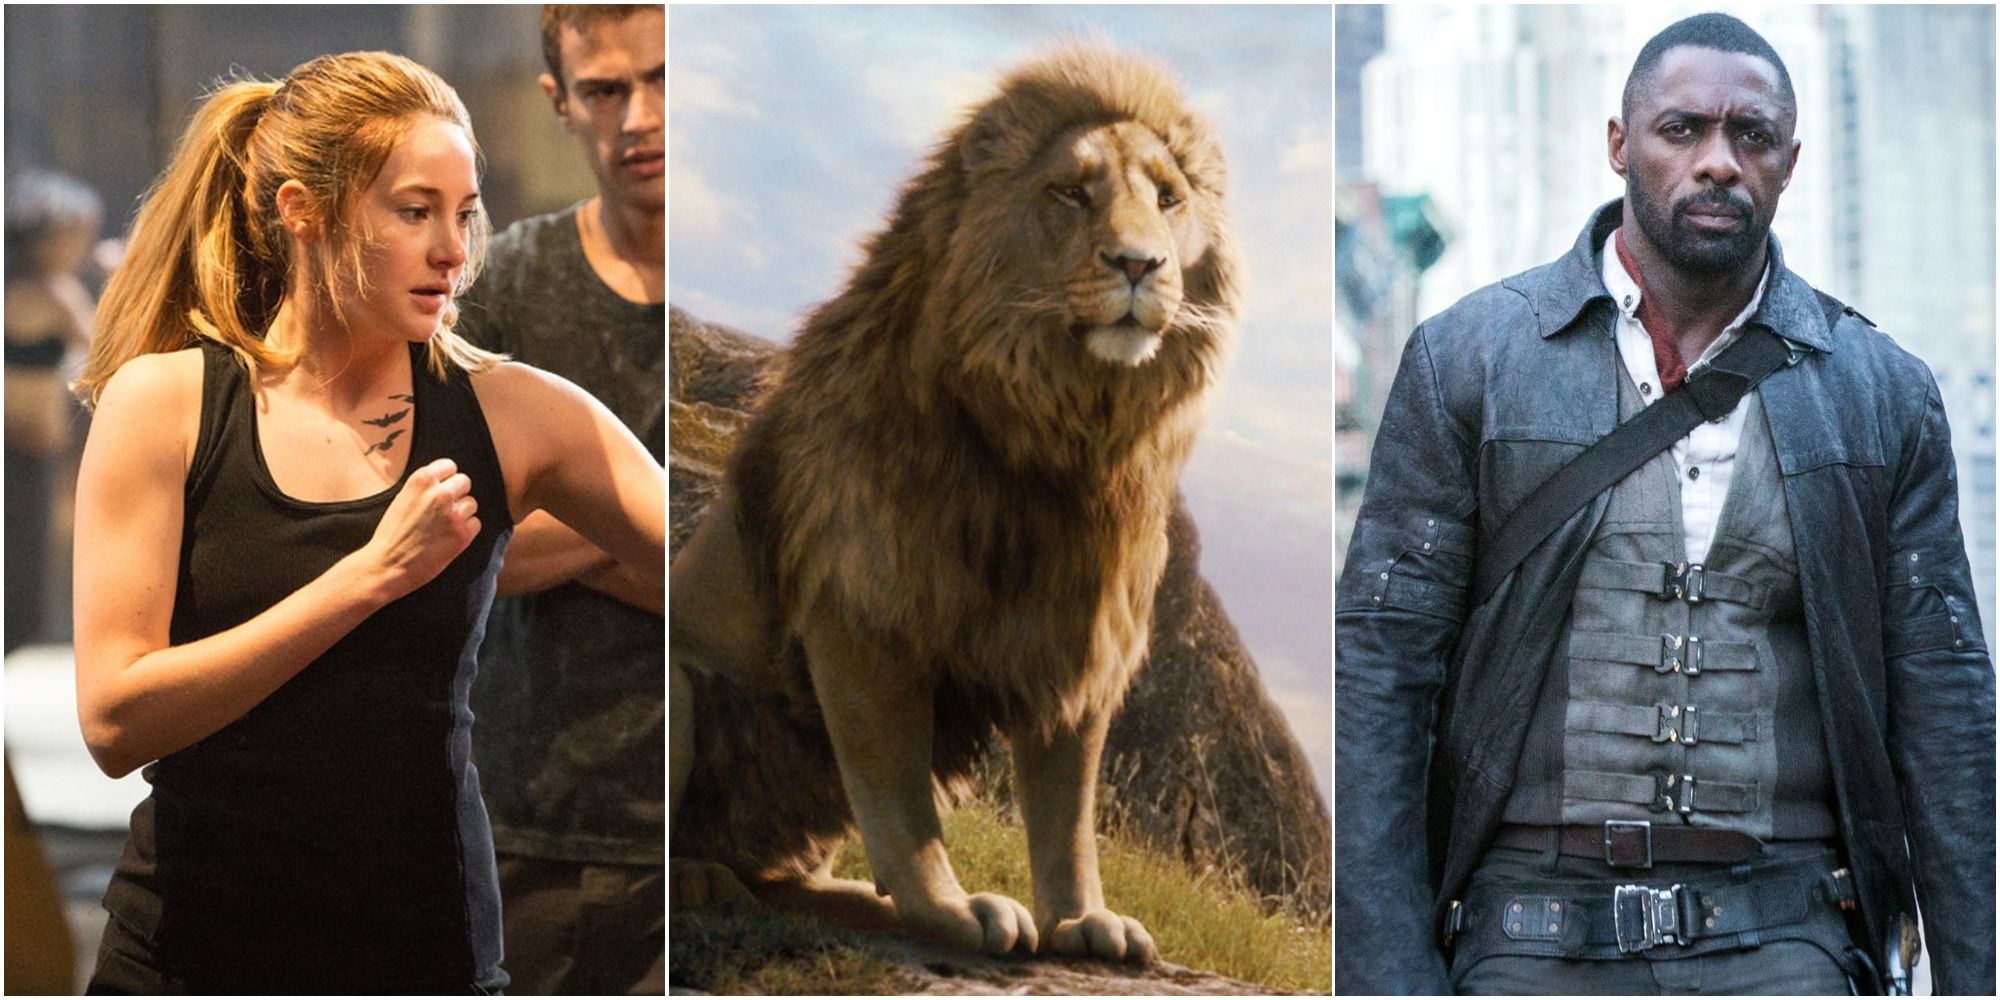 Shailene Woodley in Divergent, Aslan in Narnia and Idris Elba in The Dark Tower